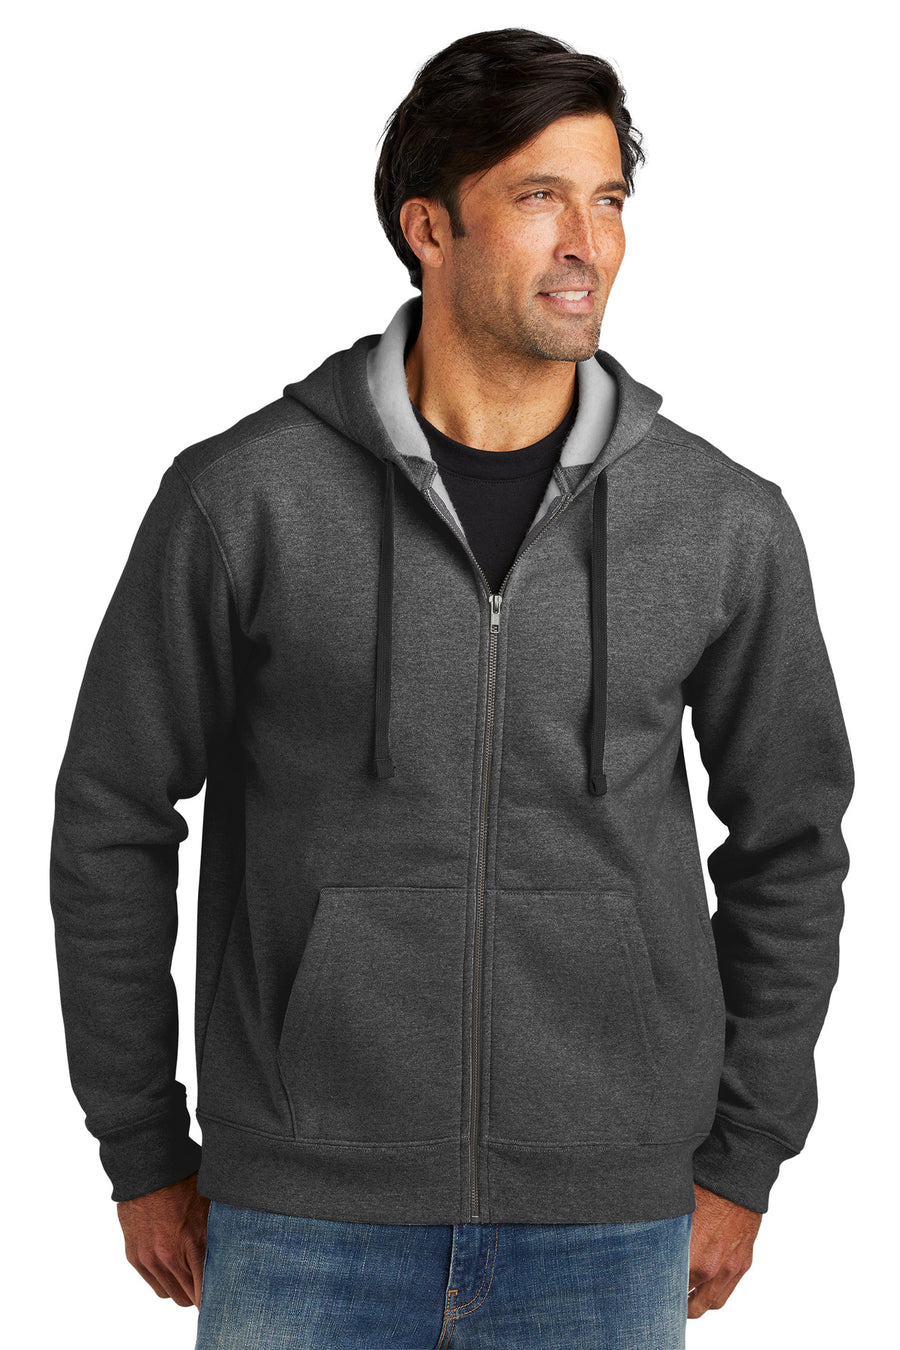 VL130ZH-Charcoal Heather -front_model